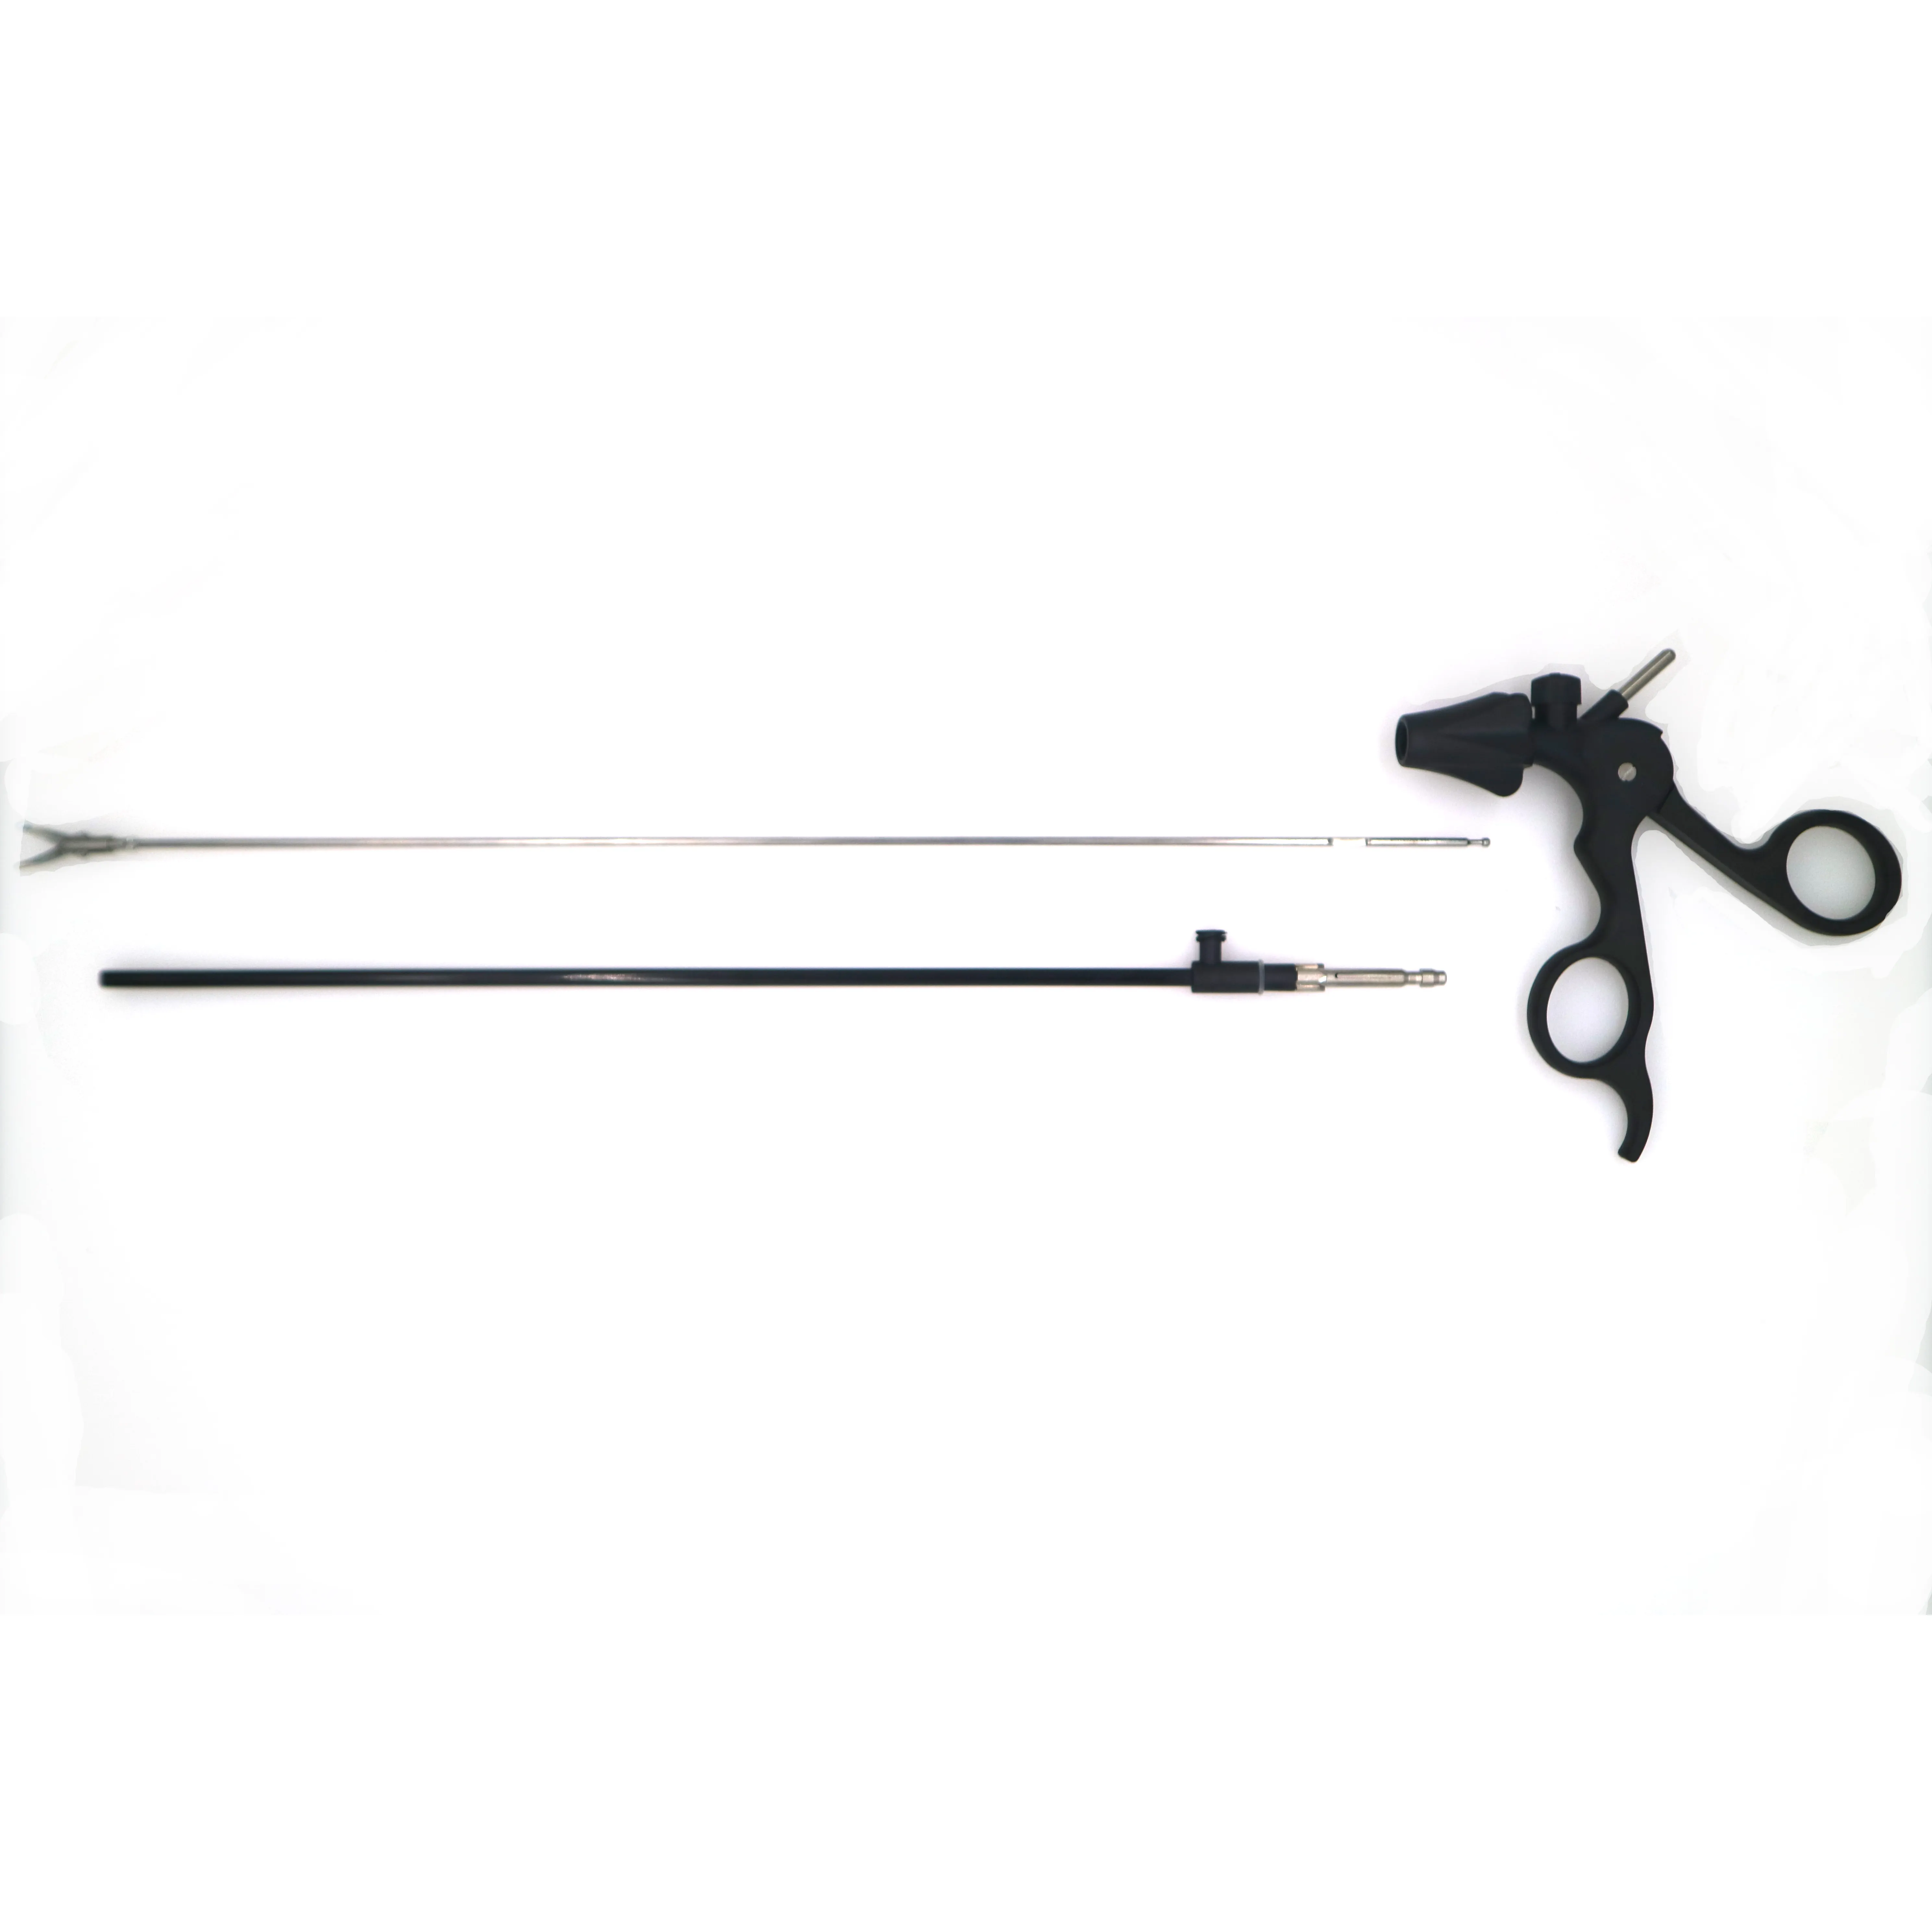 Detachable laparoscopic instruments for surgical three partition 5mm or 10mm handle